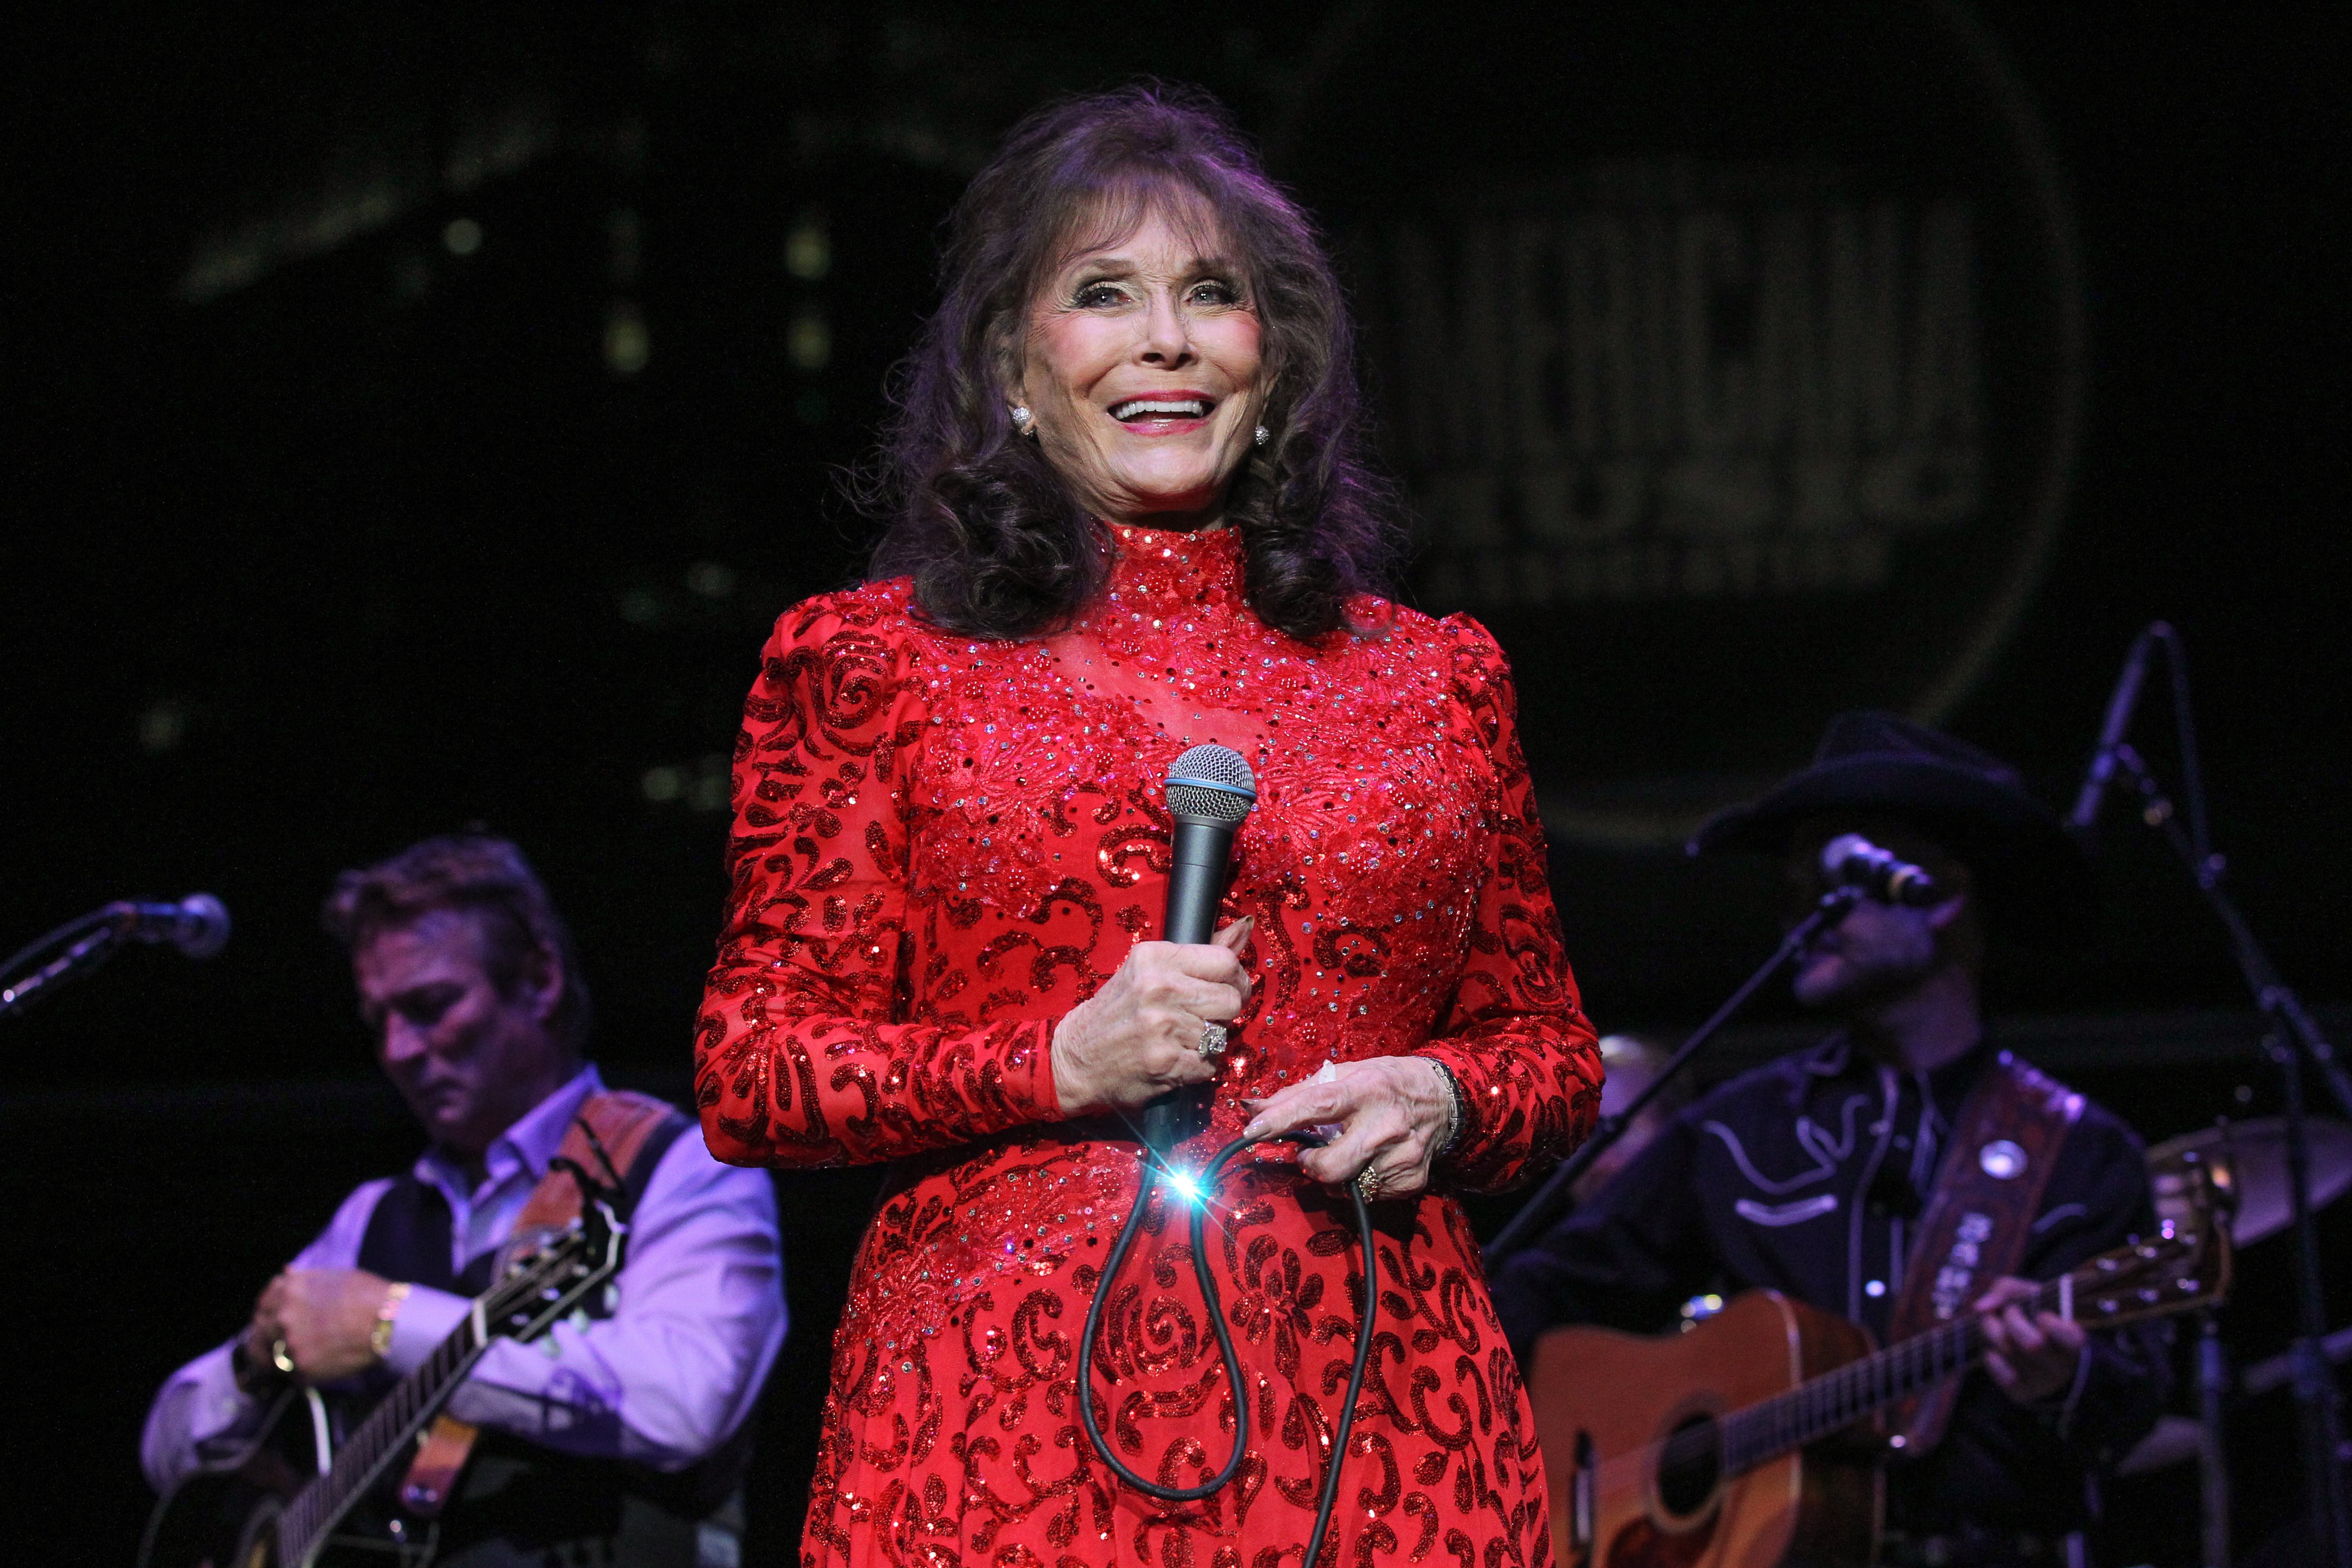 Loretta Lynn performs during the 16th Annual Americana Music Festival & Conference at Ascend Amphitheater on September 19, 2015. | Photo: GettyImages